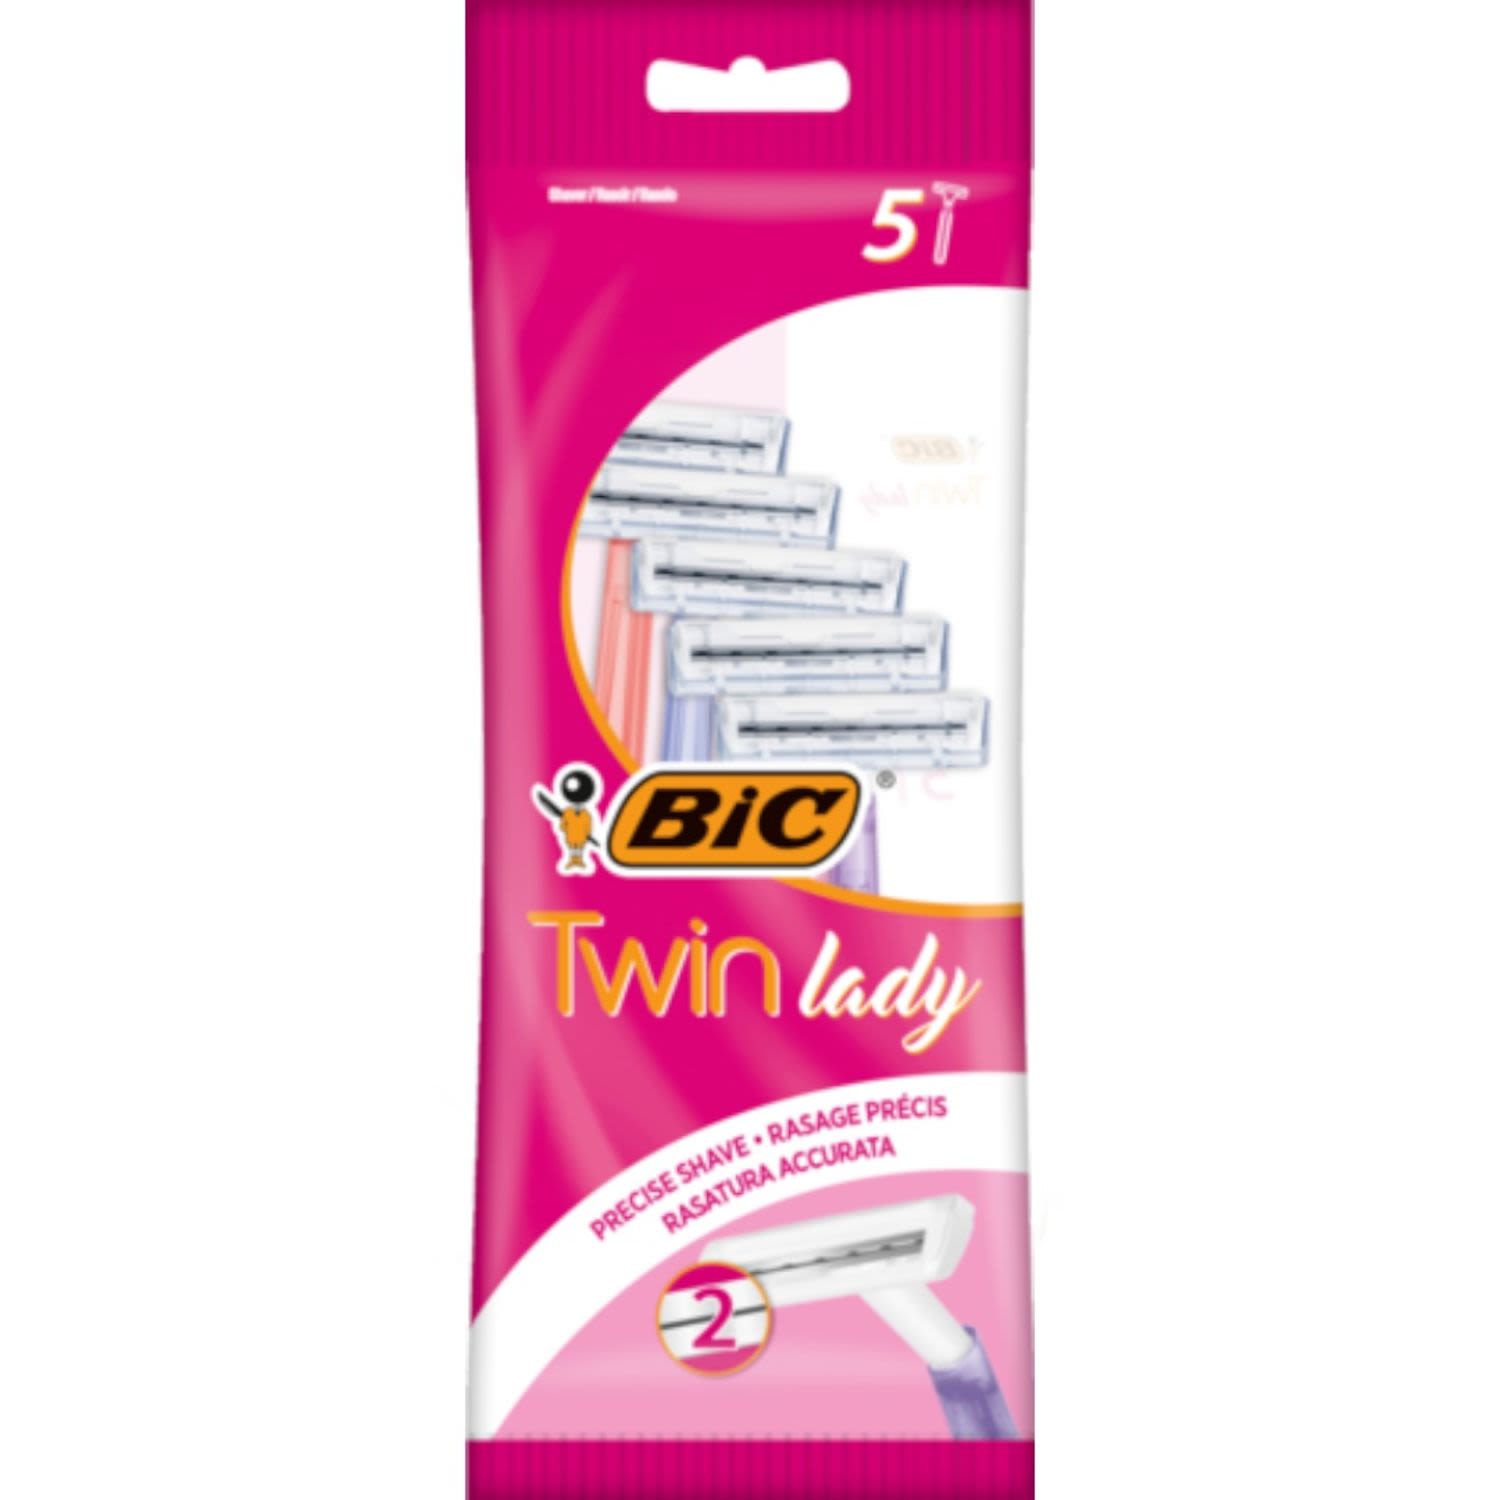 BIC Shaver Twin Lady, 5 Each